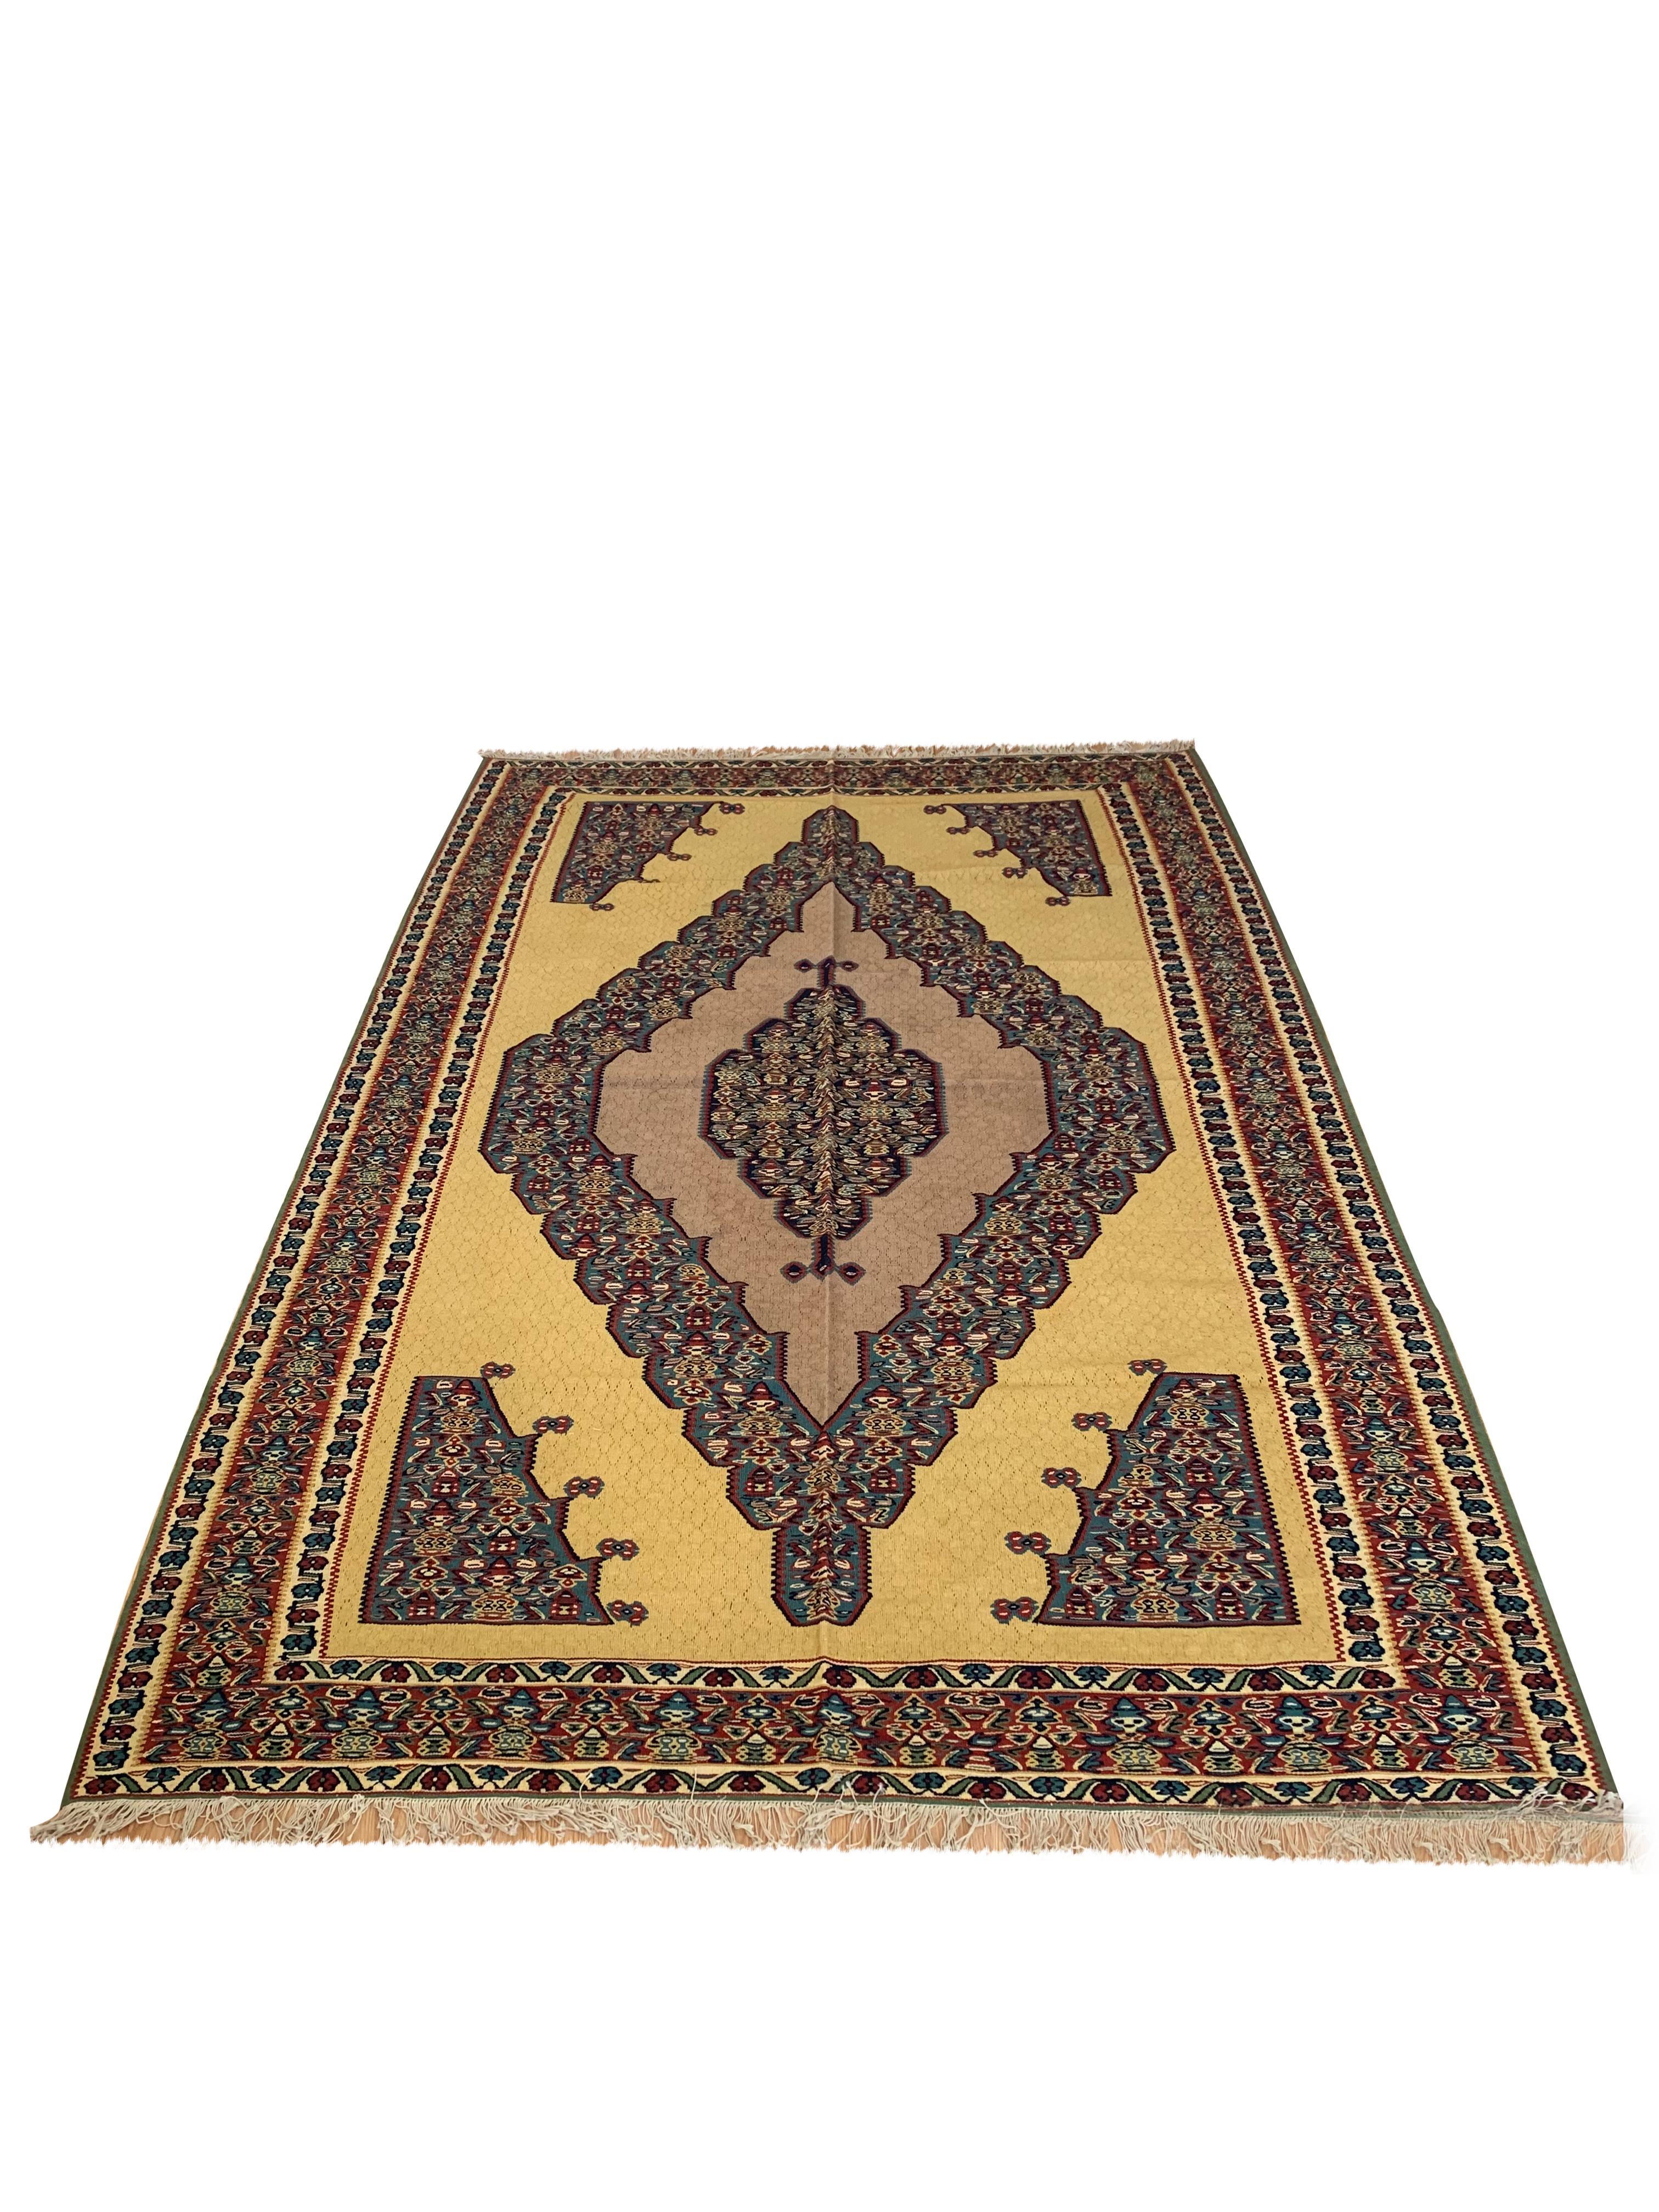 This beautiful wool carpet is a handmade, flatwoven kilim woven in the early 21st century, circa 2010. It is unused and so is in excellent condition. The design features a bold medallion design woven on a yellow background with blue, red and cream